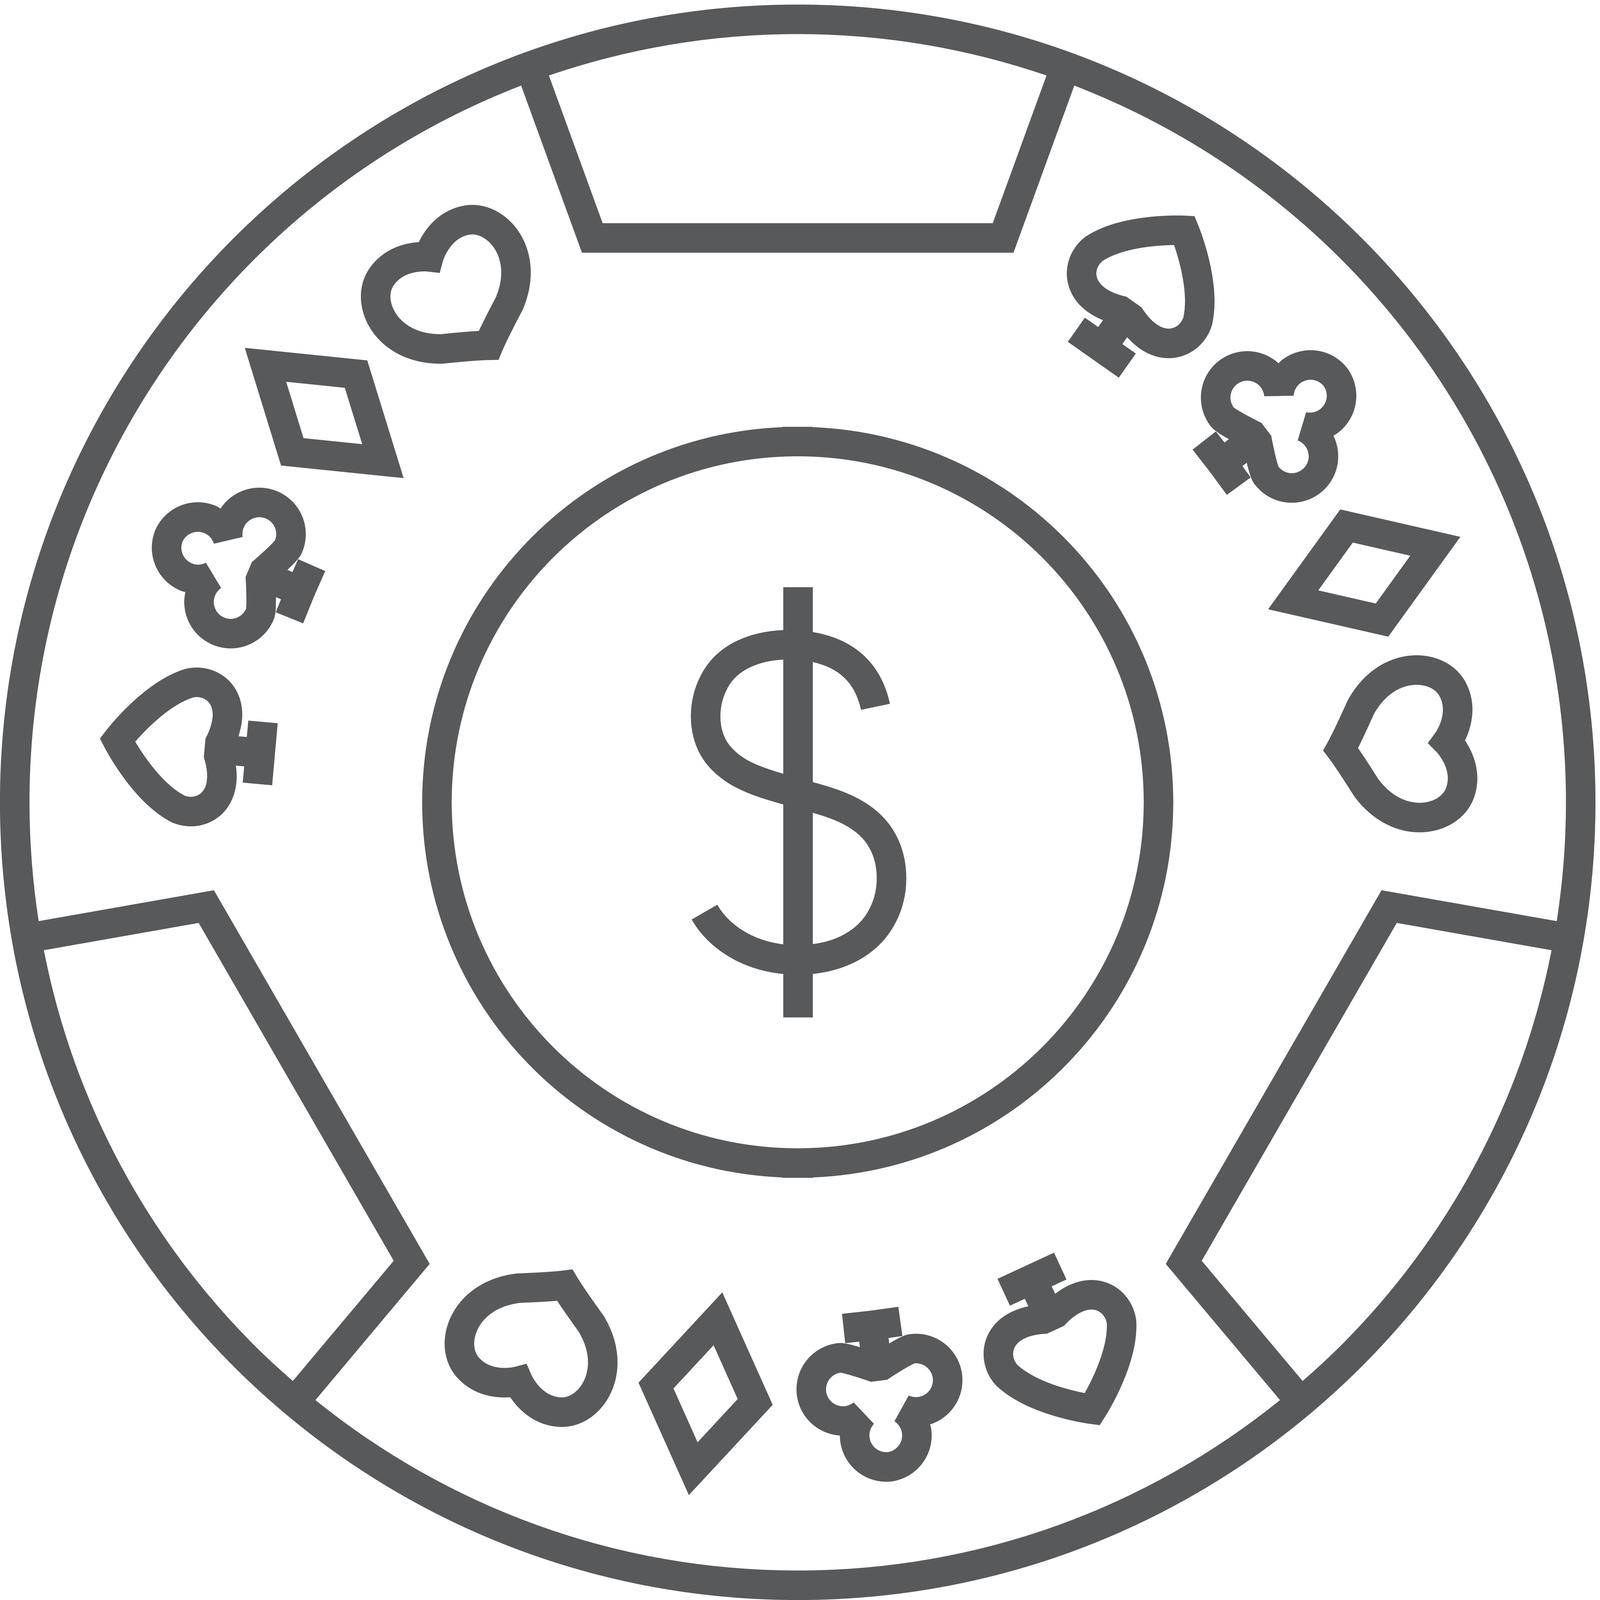 Outline icon - Gambling coin by puruan